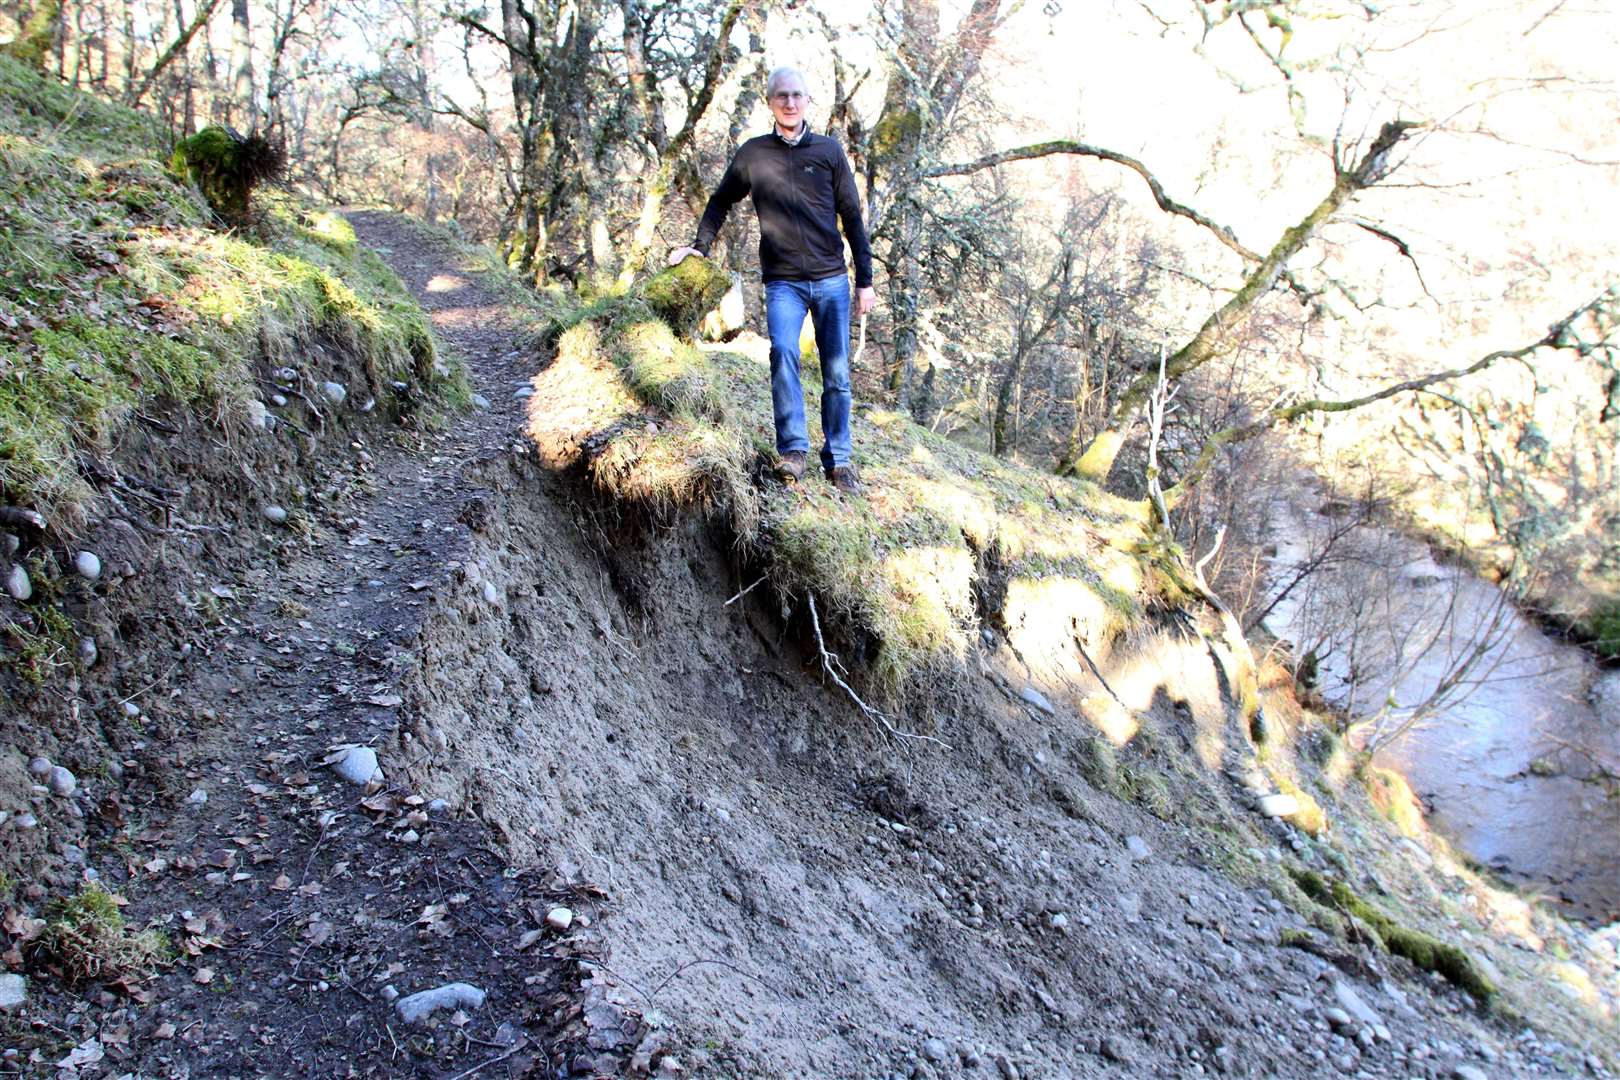 NCWDT chairman Paul Woolrich pictured earlier this year just after the Wildcat Trail footpath had been hit by the landslip.